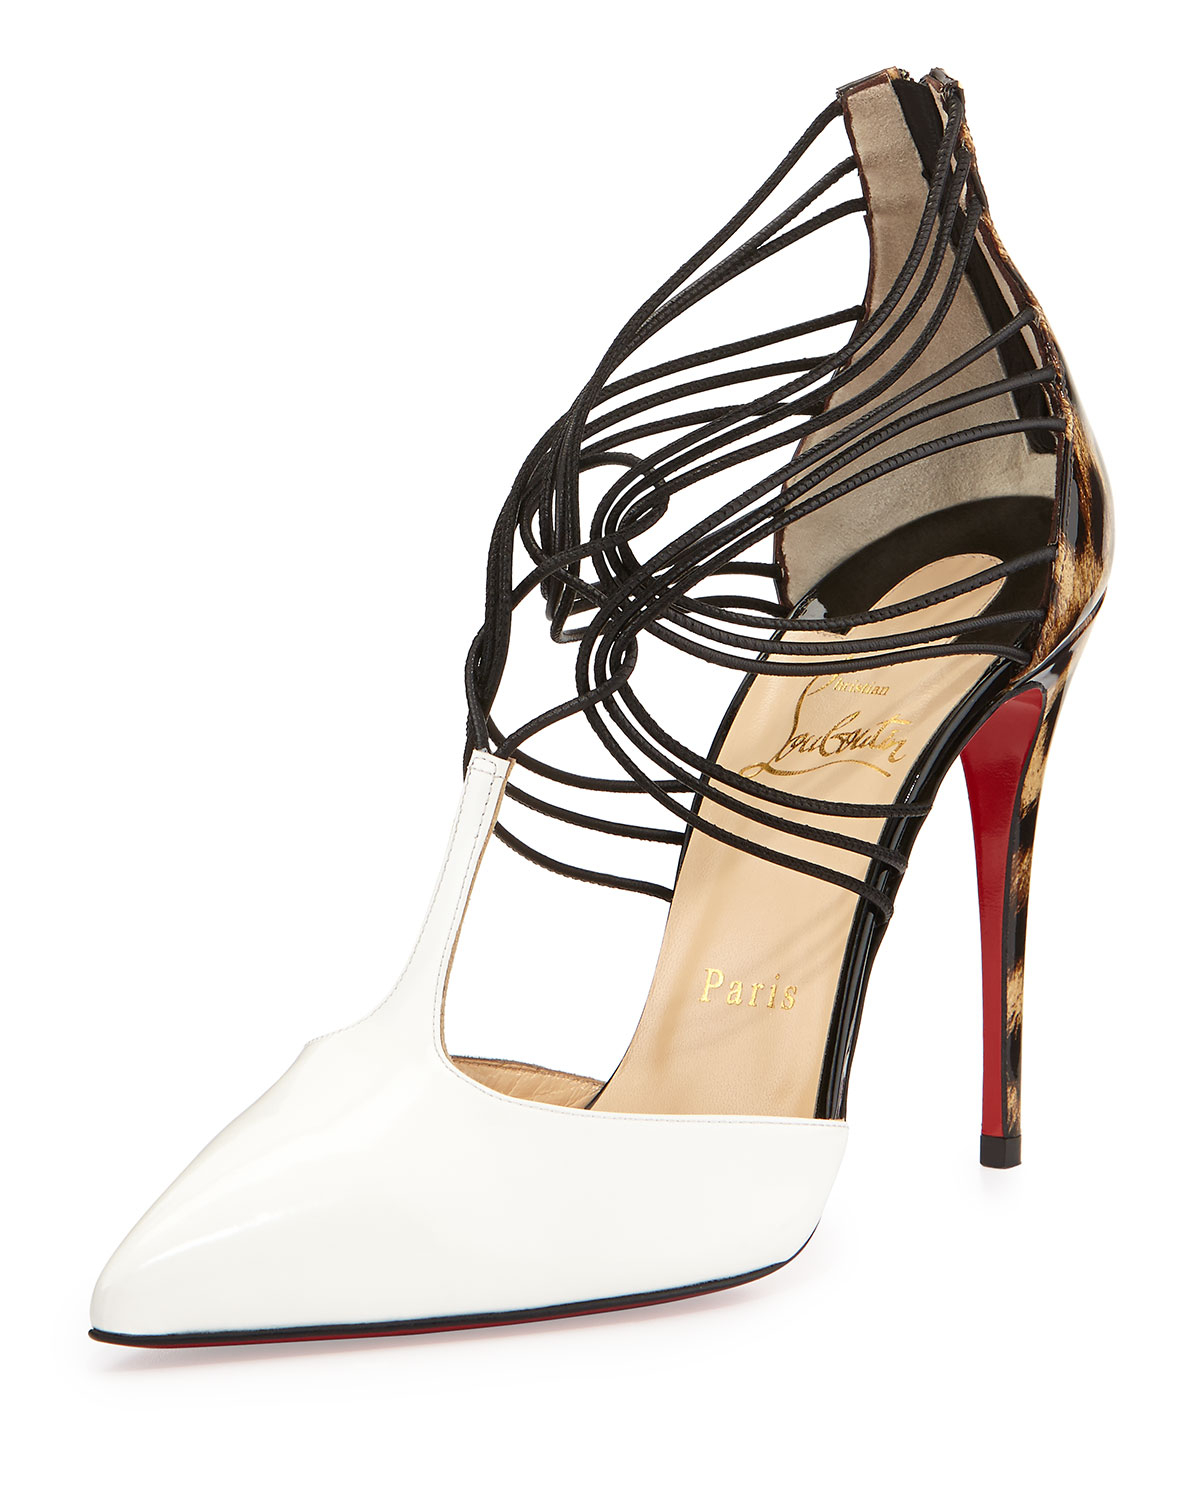 christian louboutin louis vuitton - Christian louboutin Confusa T-Strap Leather Red Sole Pump in White ...